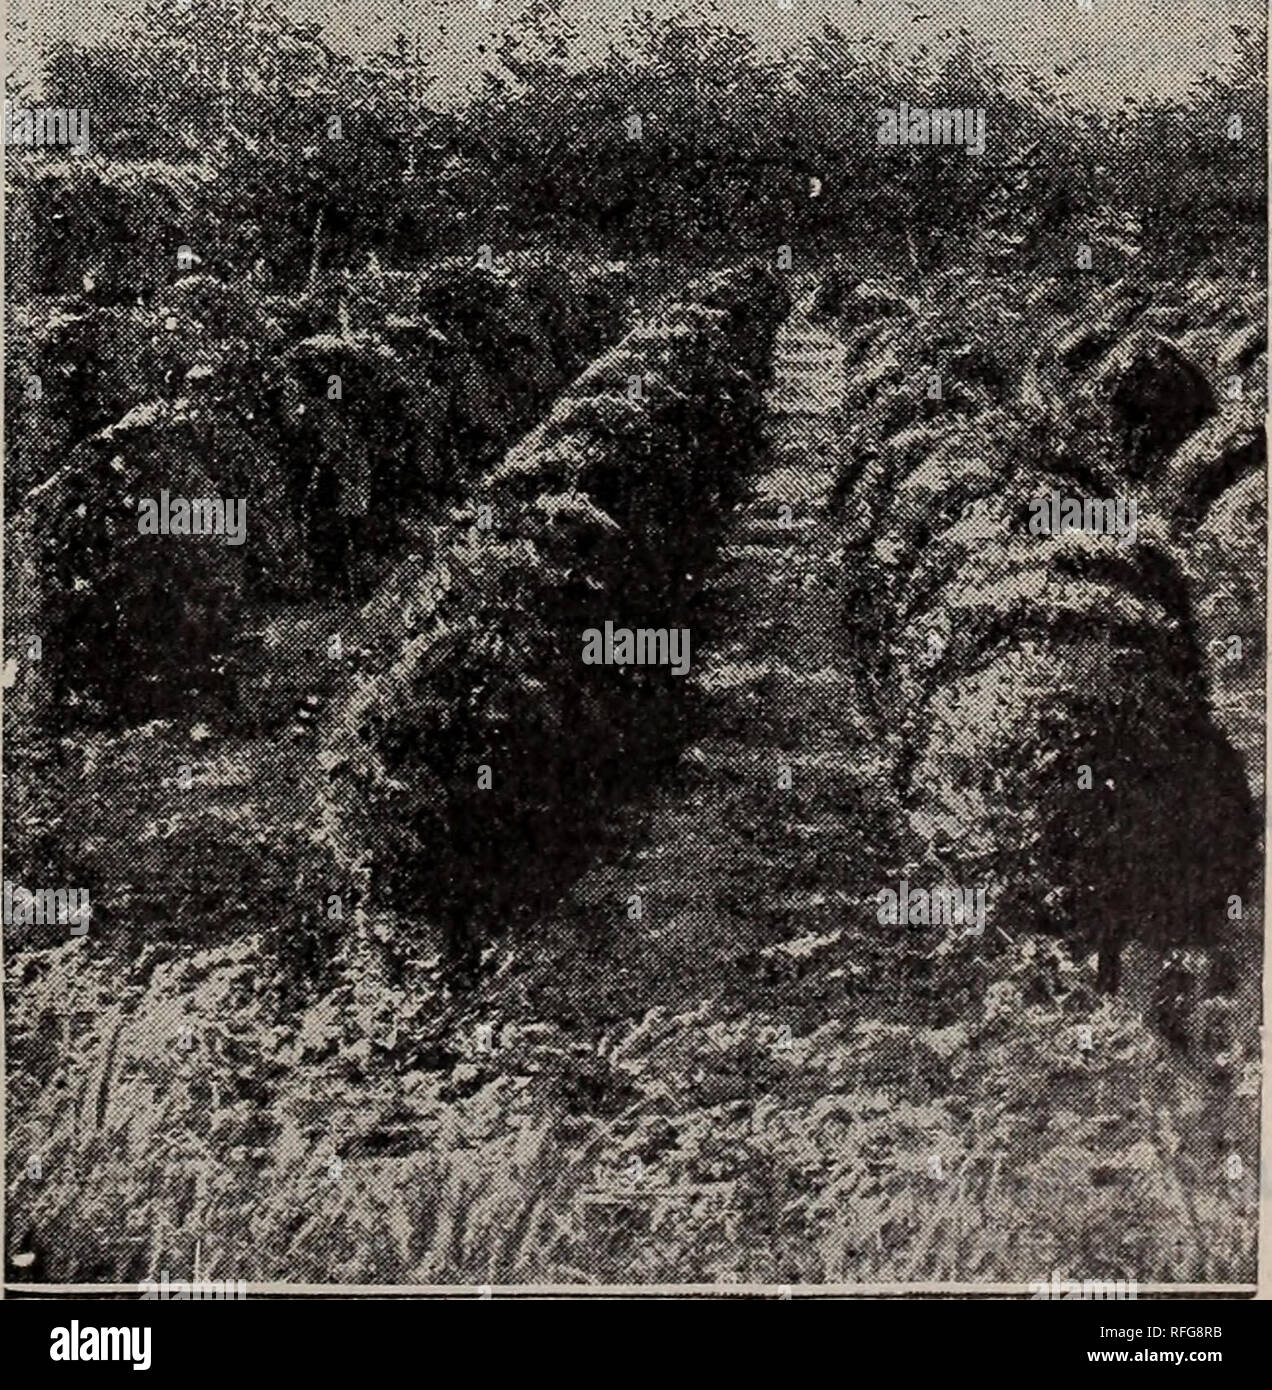 . Descriptive catalogue : trees, shrubs and plants. Nursery stock, New York (State), New York, Catalogs; Trees, Seedlings, Catalogs; Shrubs, Catalogs; Flowers, Catalogs; Fruit, Catalogs. FLUSHING, NEW YORK 33 SCIADOPITYS S. verticillatus. Umbrella Pine. (30ft.) A beautiful and hardy evergreen from Japan. Shining dark green foliage ar- ranged in whorls of umbrella-like tufts. Of slow growth, but rare and desirable. $3- TAXUS. Yew T. adpressa stricta. Japan Yew. (6 to 8 ft.) Foliage dark green; leaves short; habit upright. Desirable. 50 cts. tofi. T. baccata. English Yew. (iotoi2ft.) A most desi Stock Photo